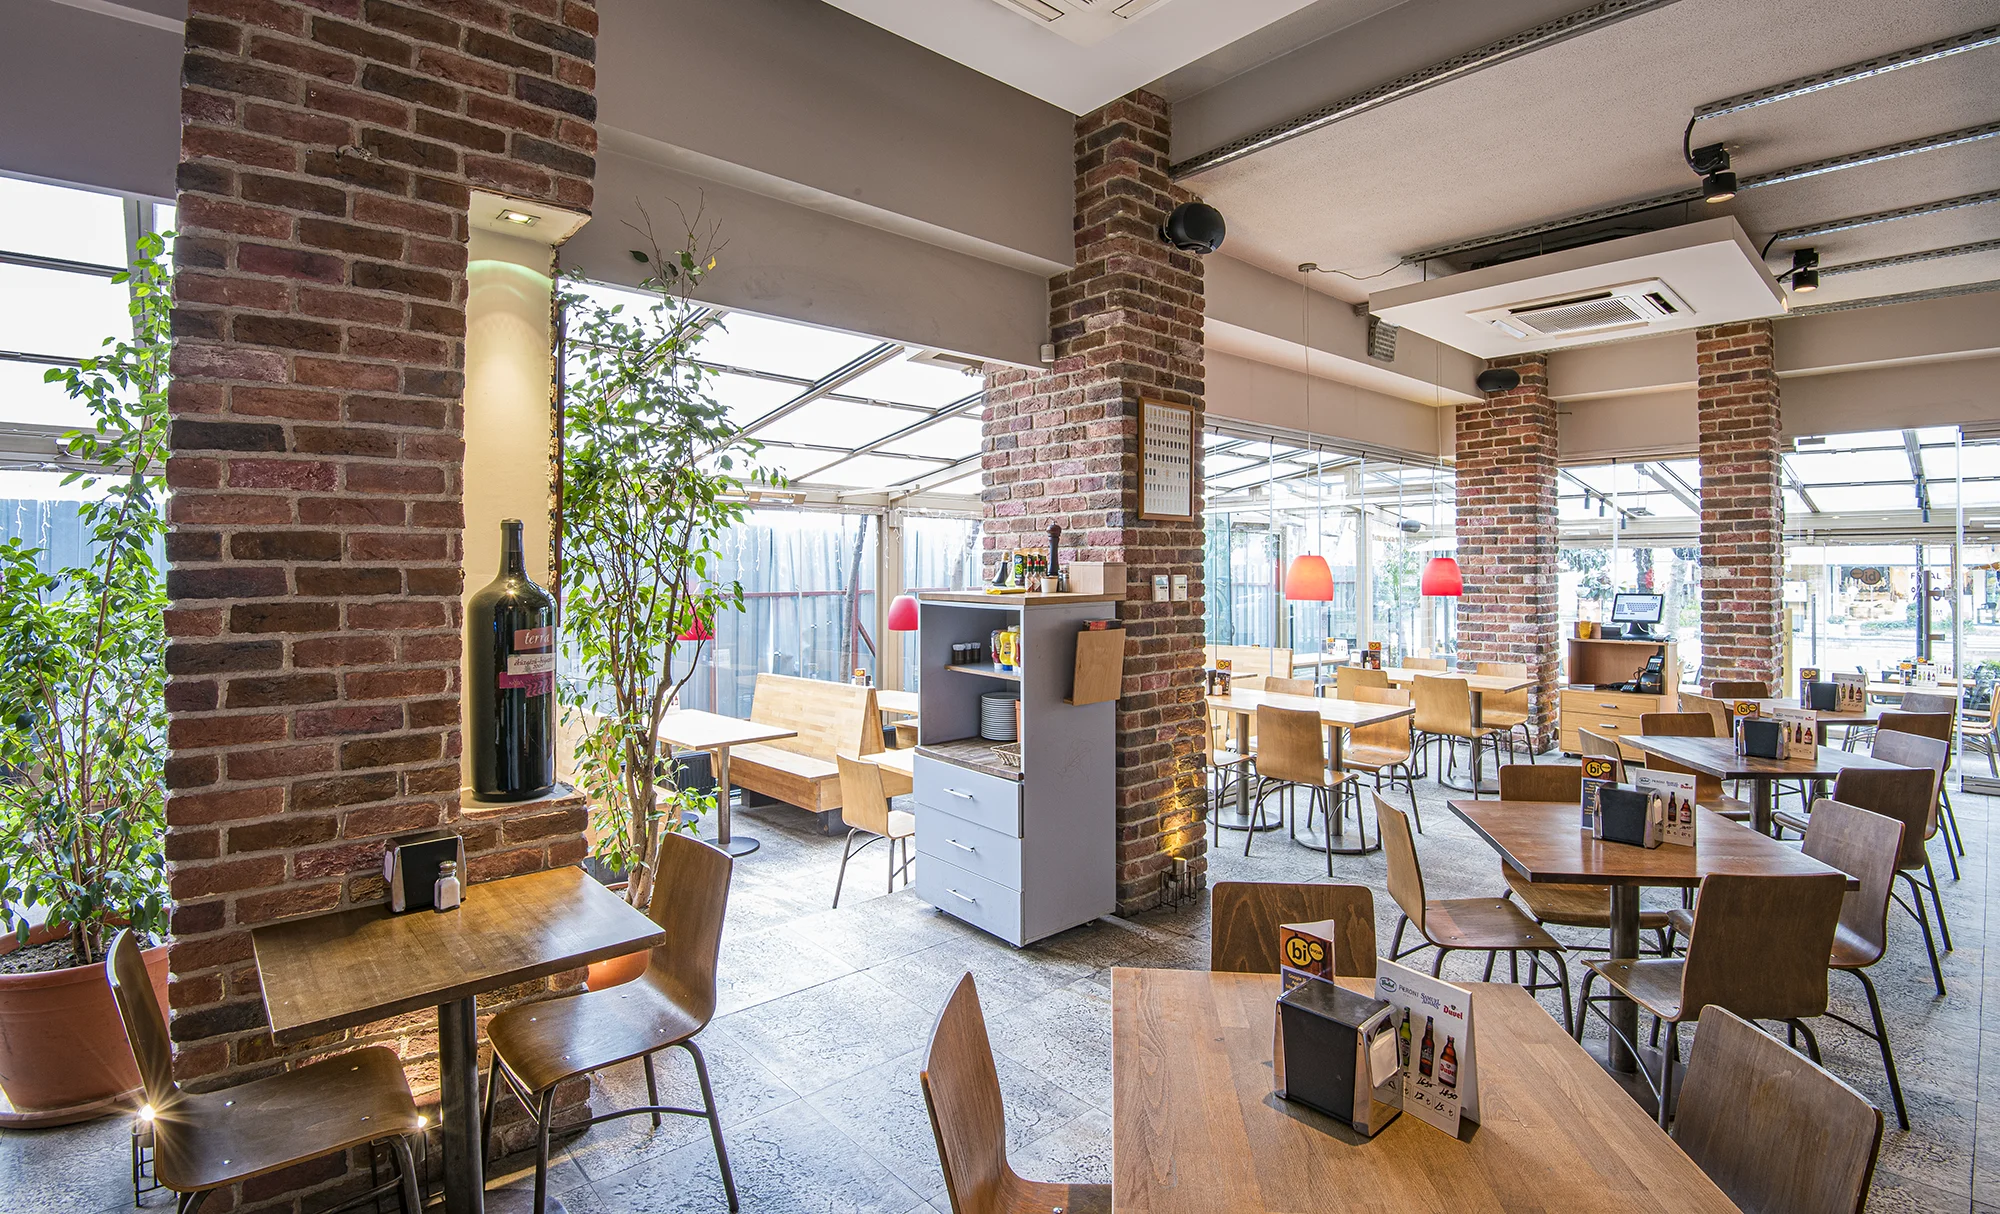 A light-well cafe with red brick walls